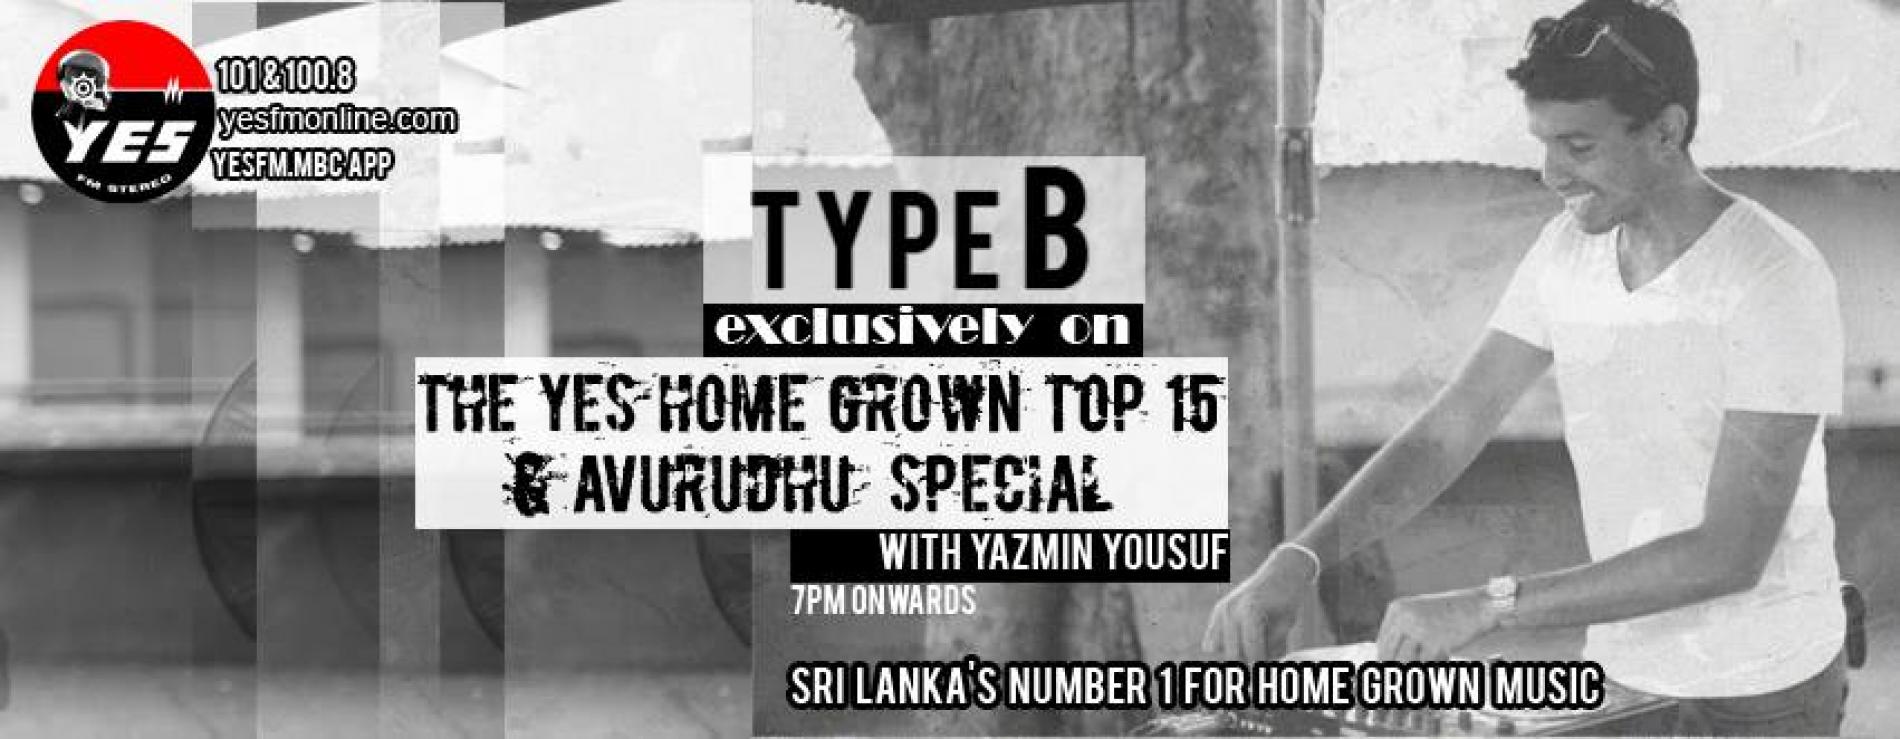 Type B On The YES Home Grown Top 15